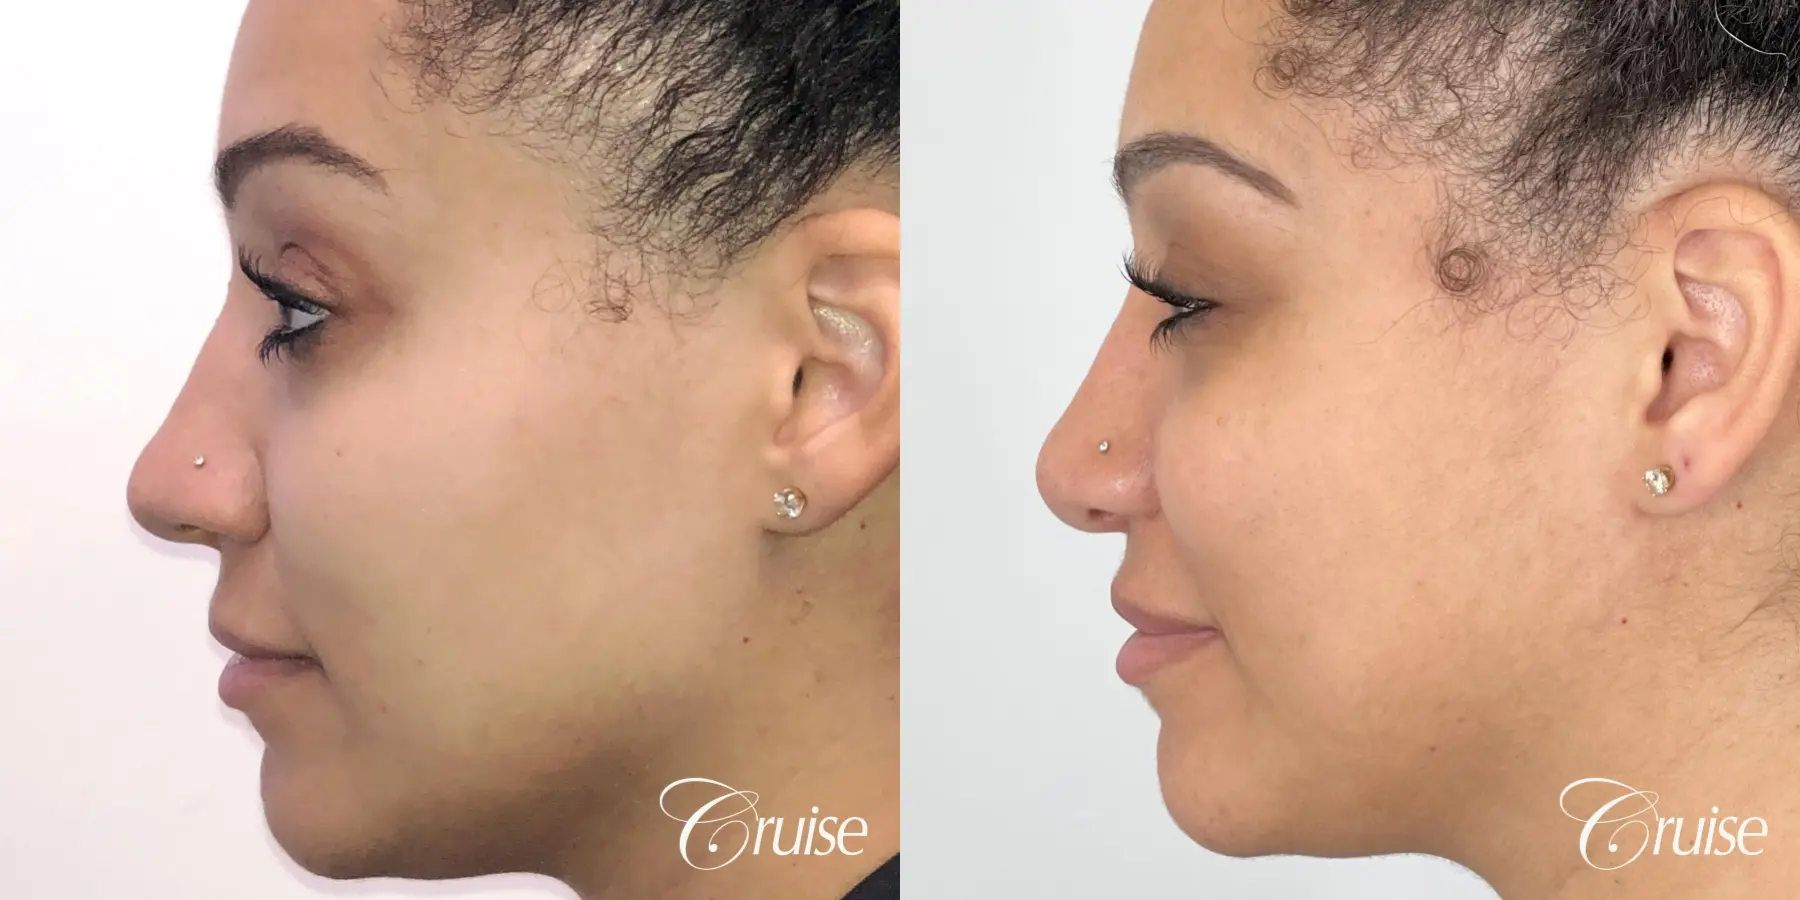 rhinoplasty orange county - Before and After 3